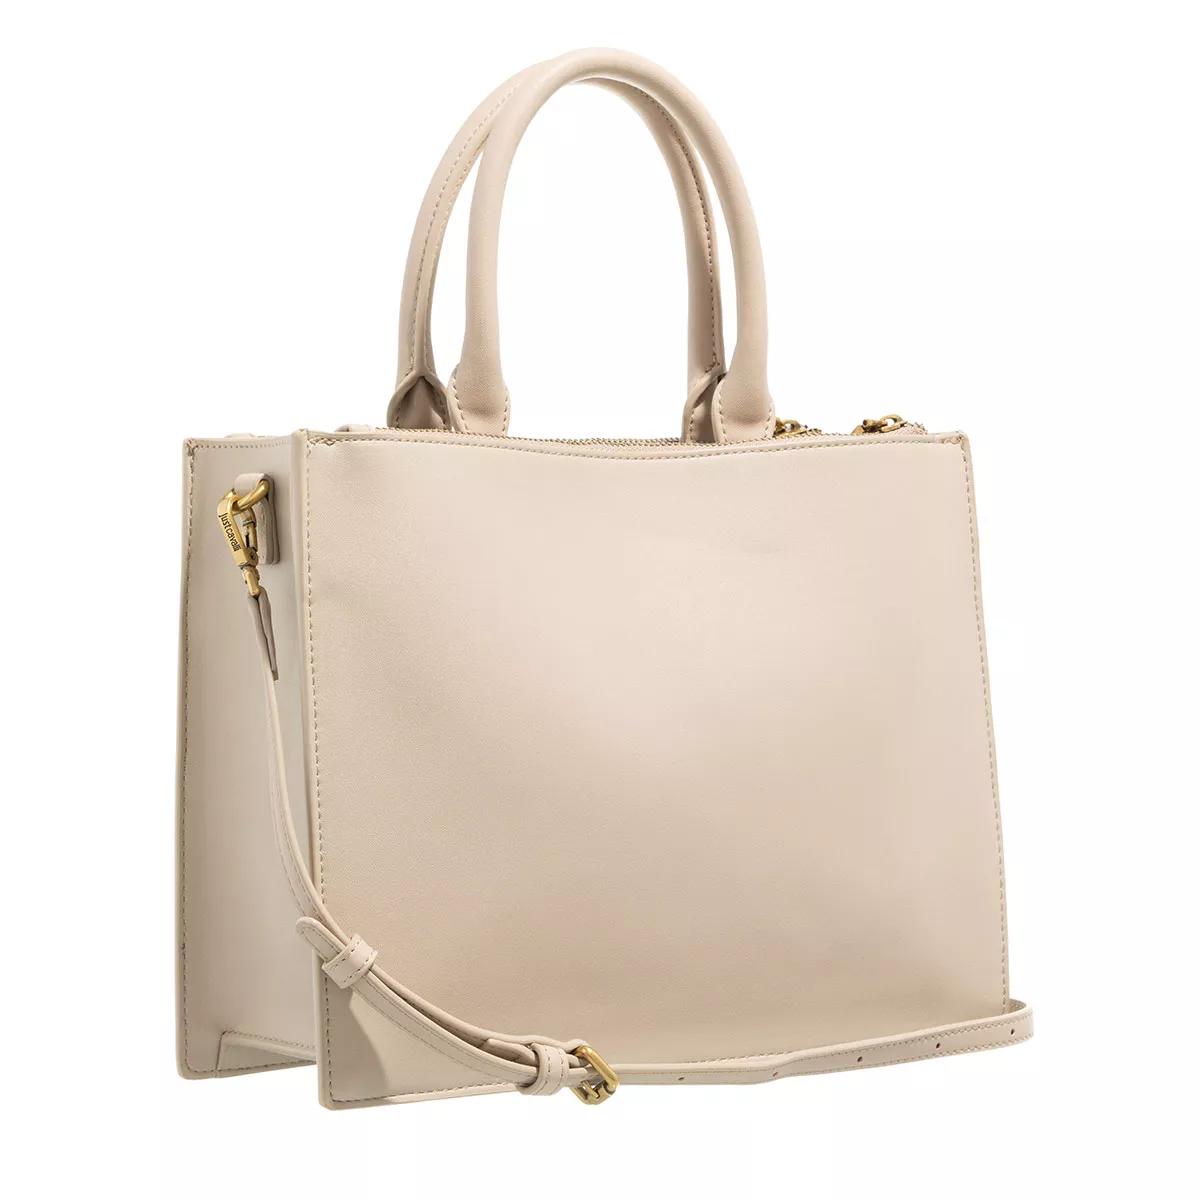 Just Cavalli Totes Range E Tiger Embossed Sketch 4 Bags in taupe